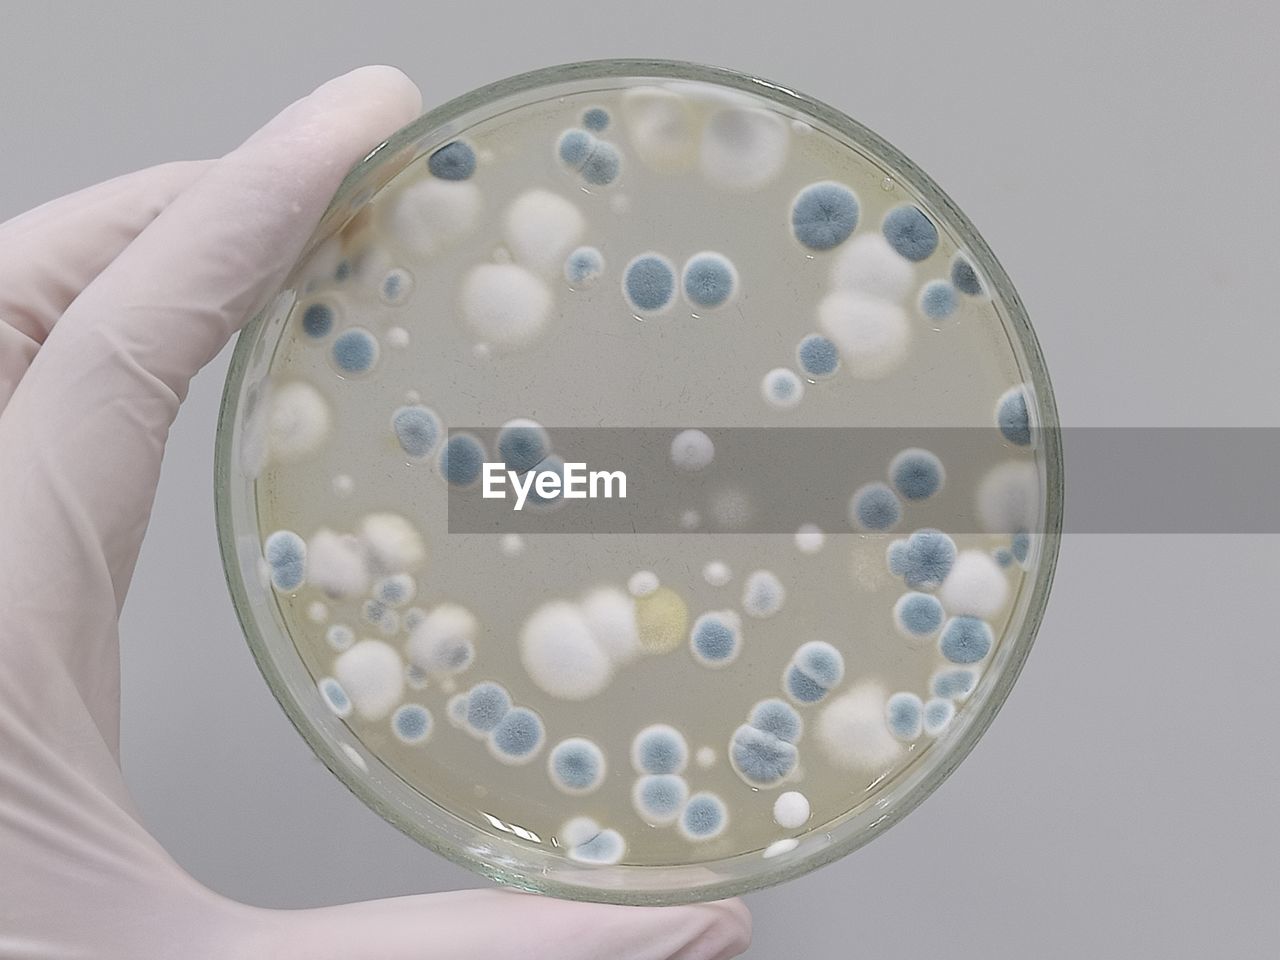 science, hand, healthcare and medicine, holding, research, indoors, scientific experiment, one person, education, biology, laboratory, studio shot, biochemistry, close-up, petri dish, chemistry, adult, medical research, occupation